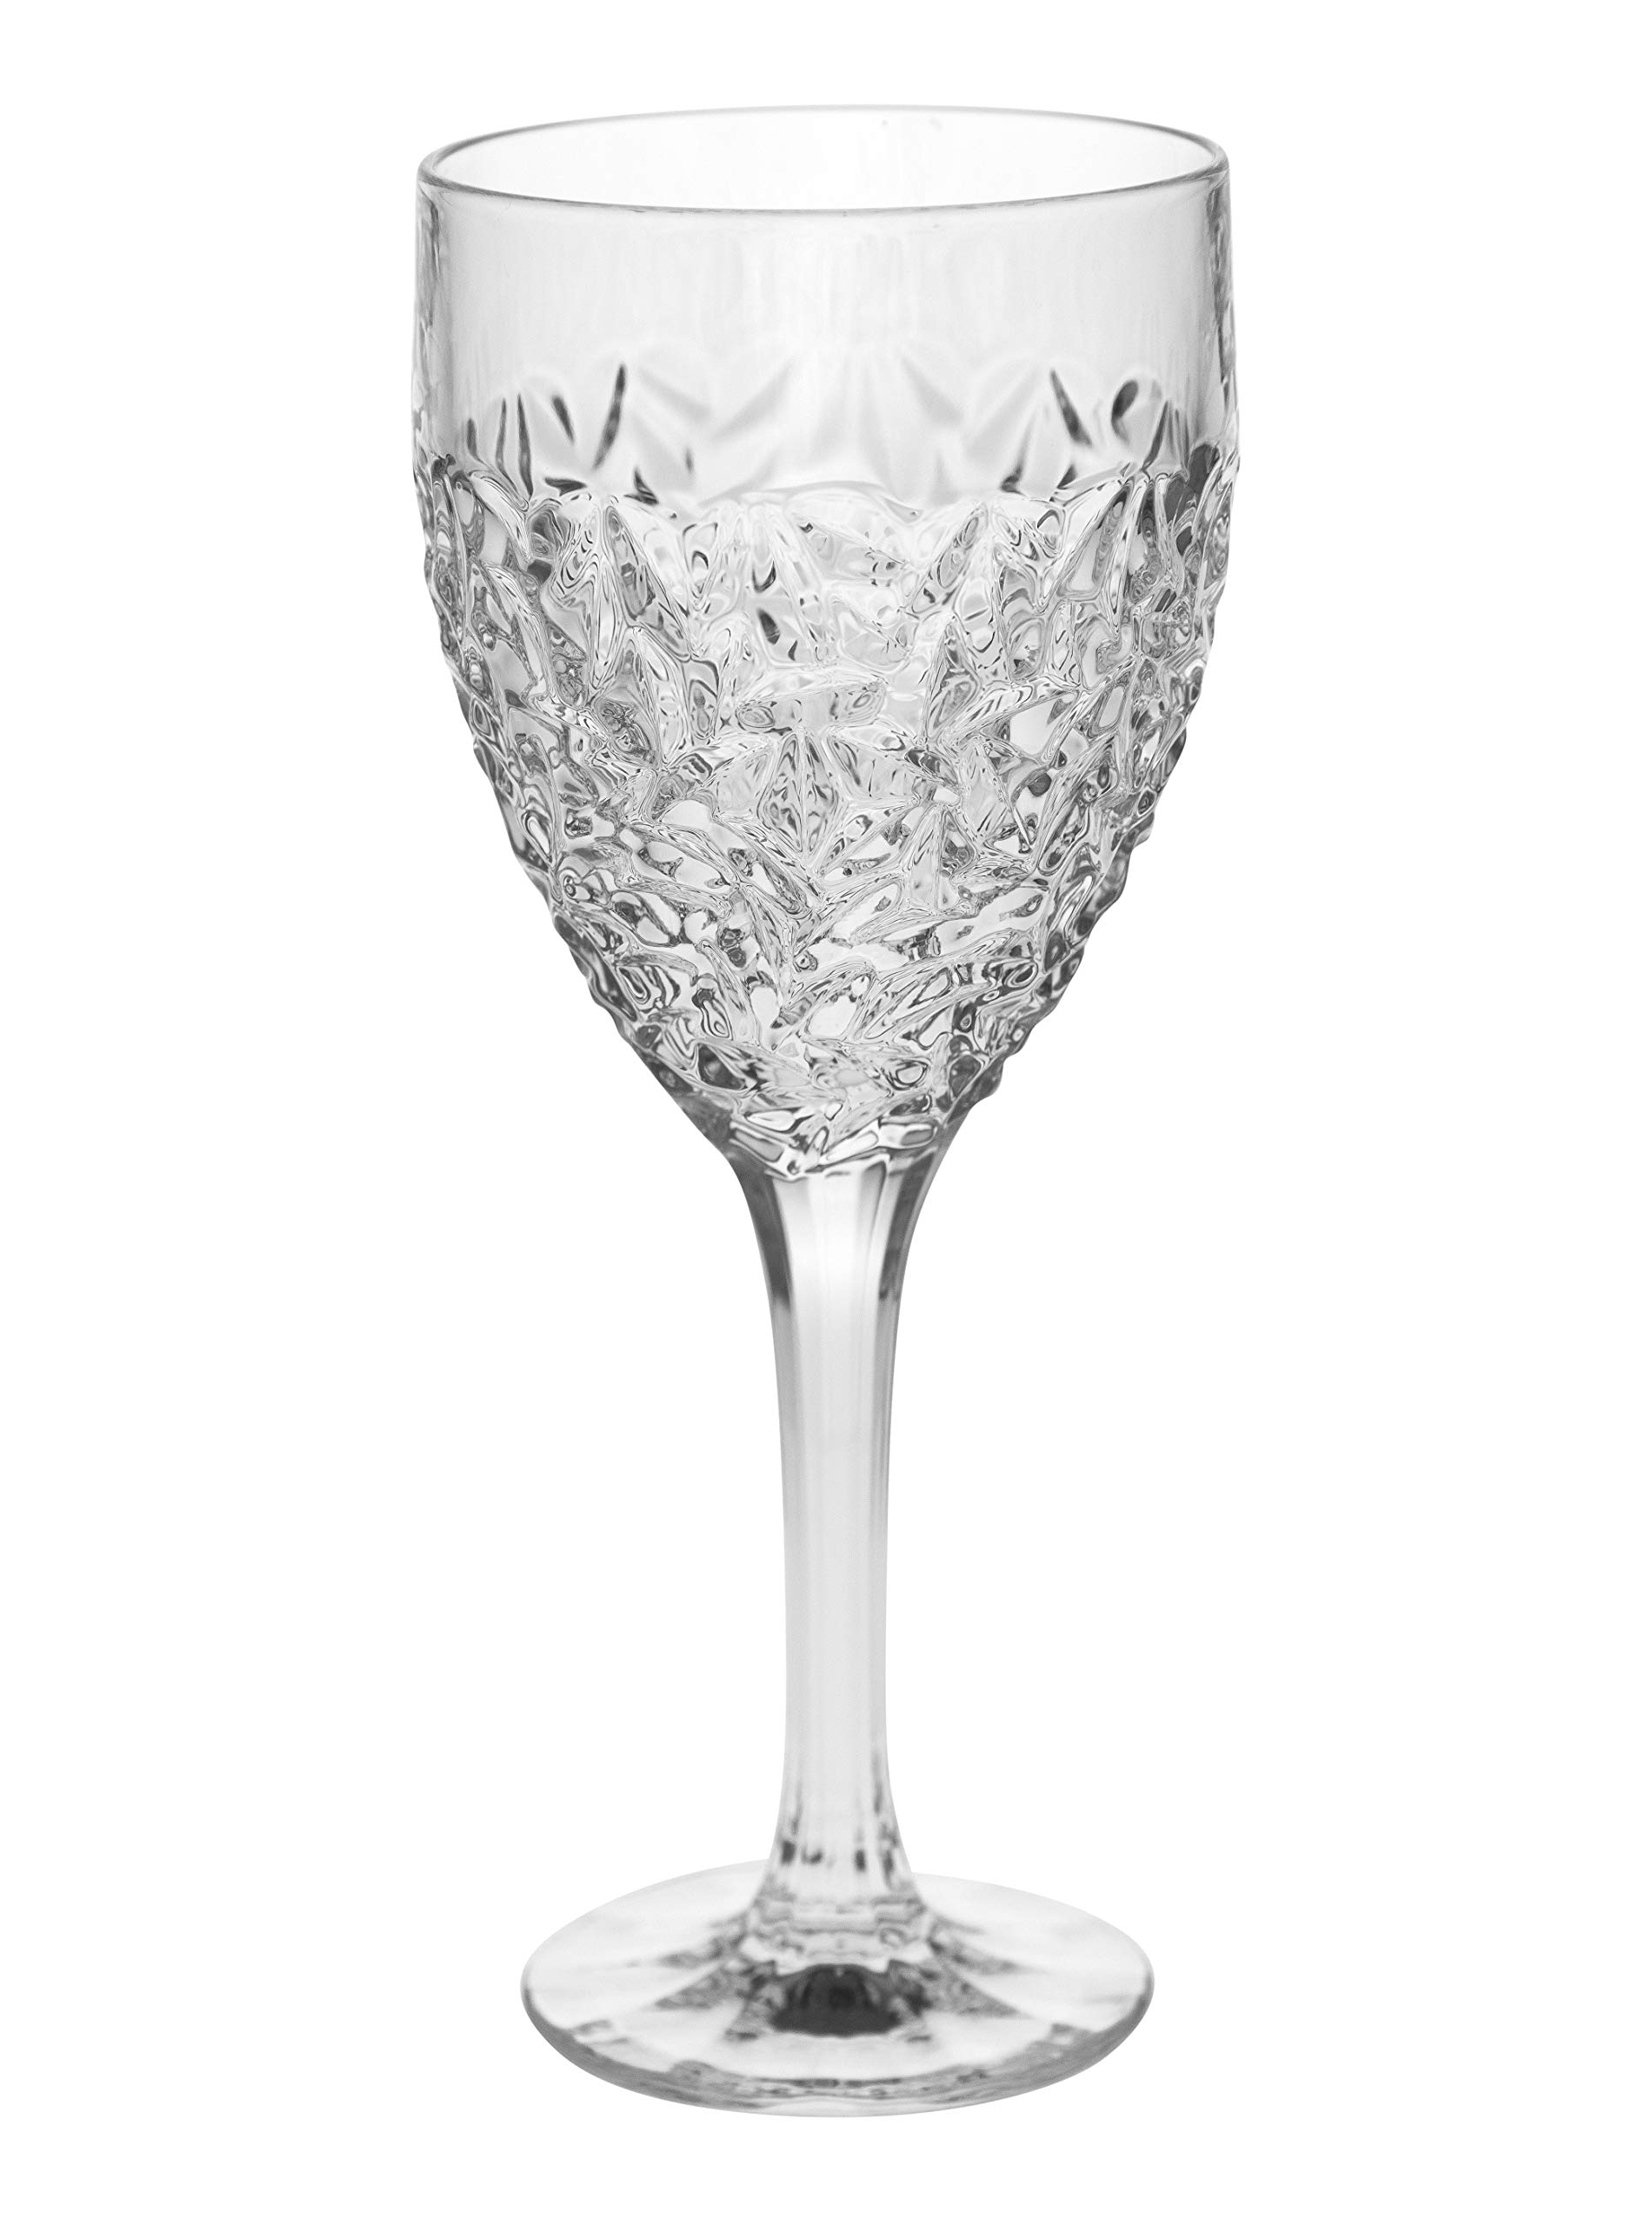 Goblet - Wine Glass - Water Glass - Crystal - Set of 6 Stemmed Glasses - Glass is designed With Raindrop Design - 12 oz. - by Barski - Made in Europe -